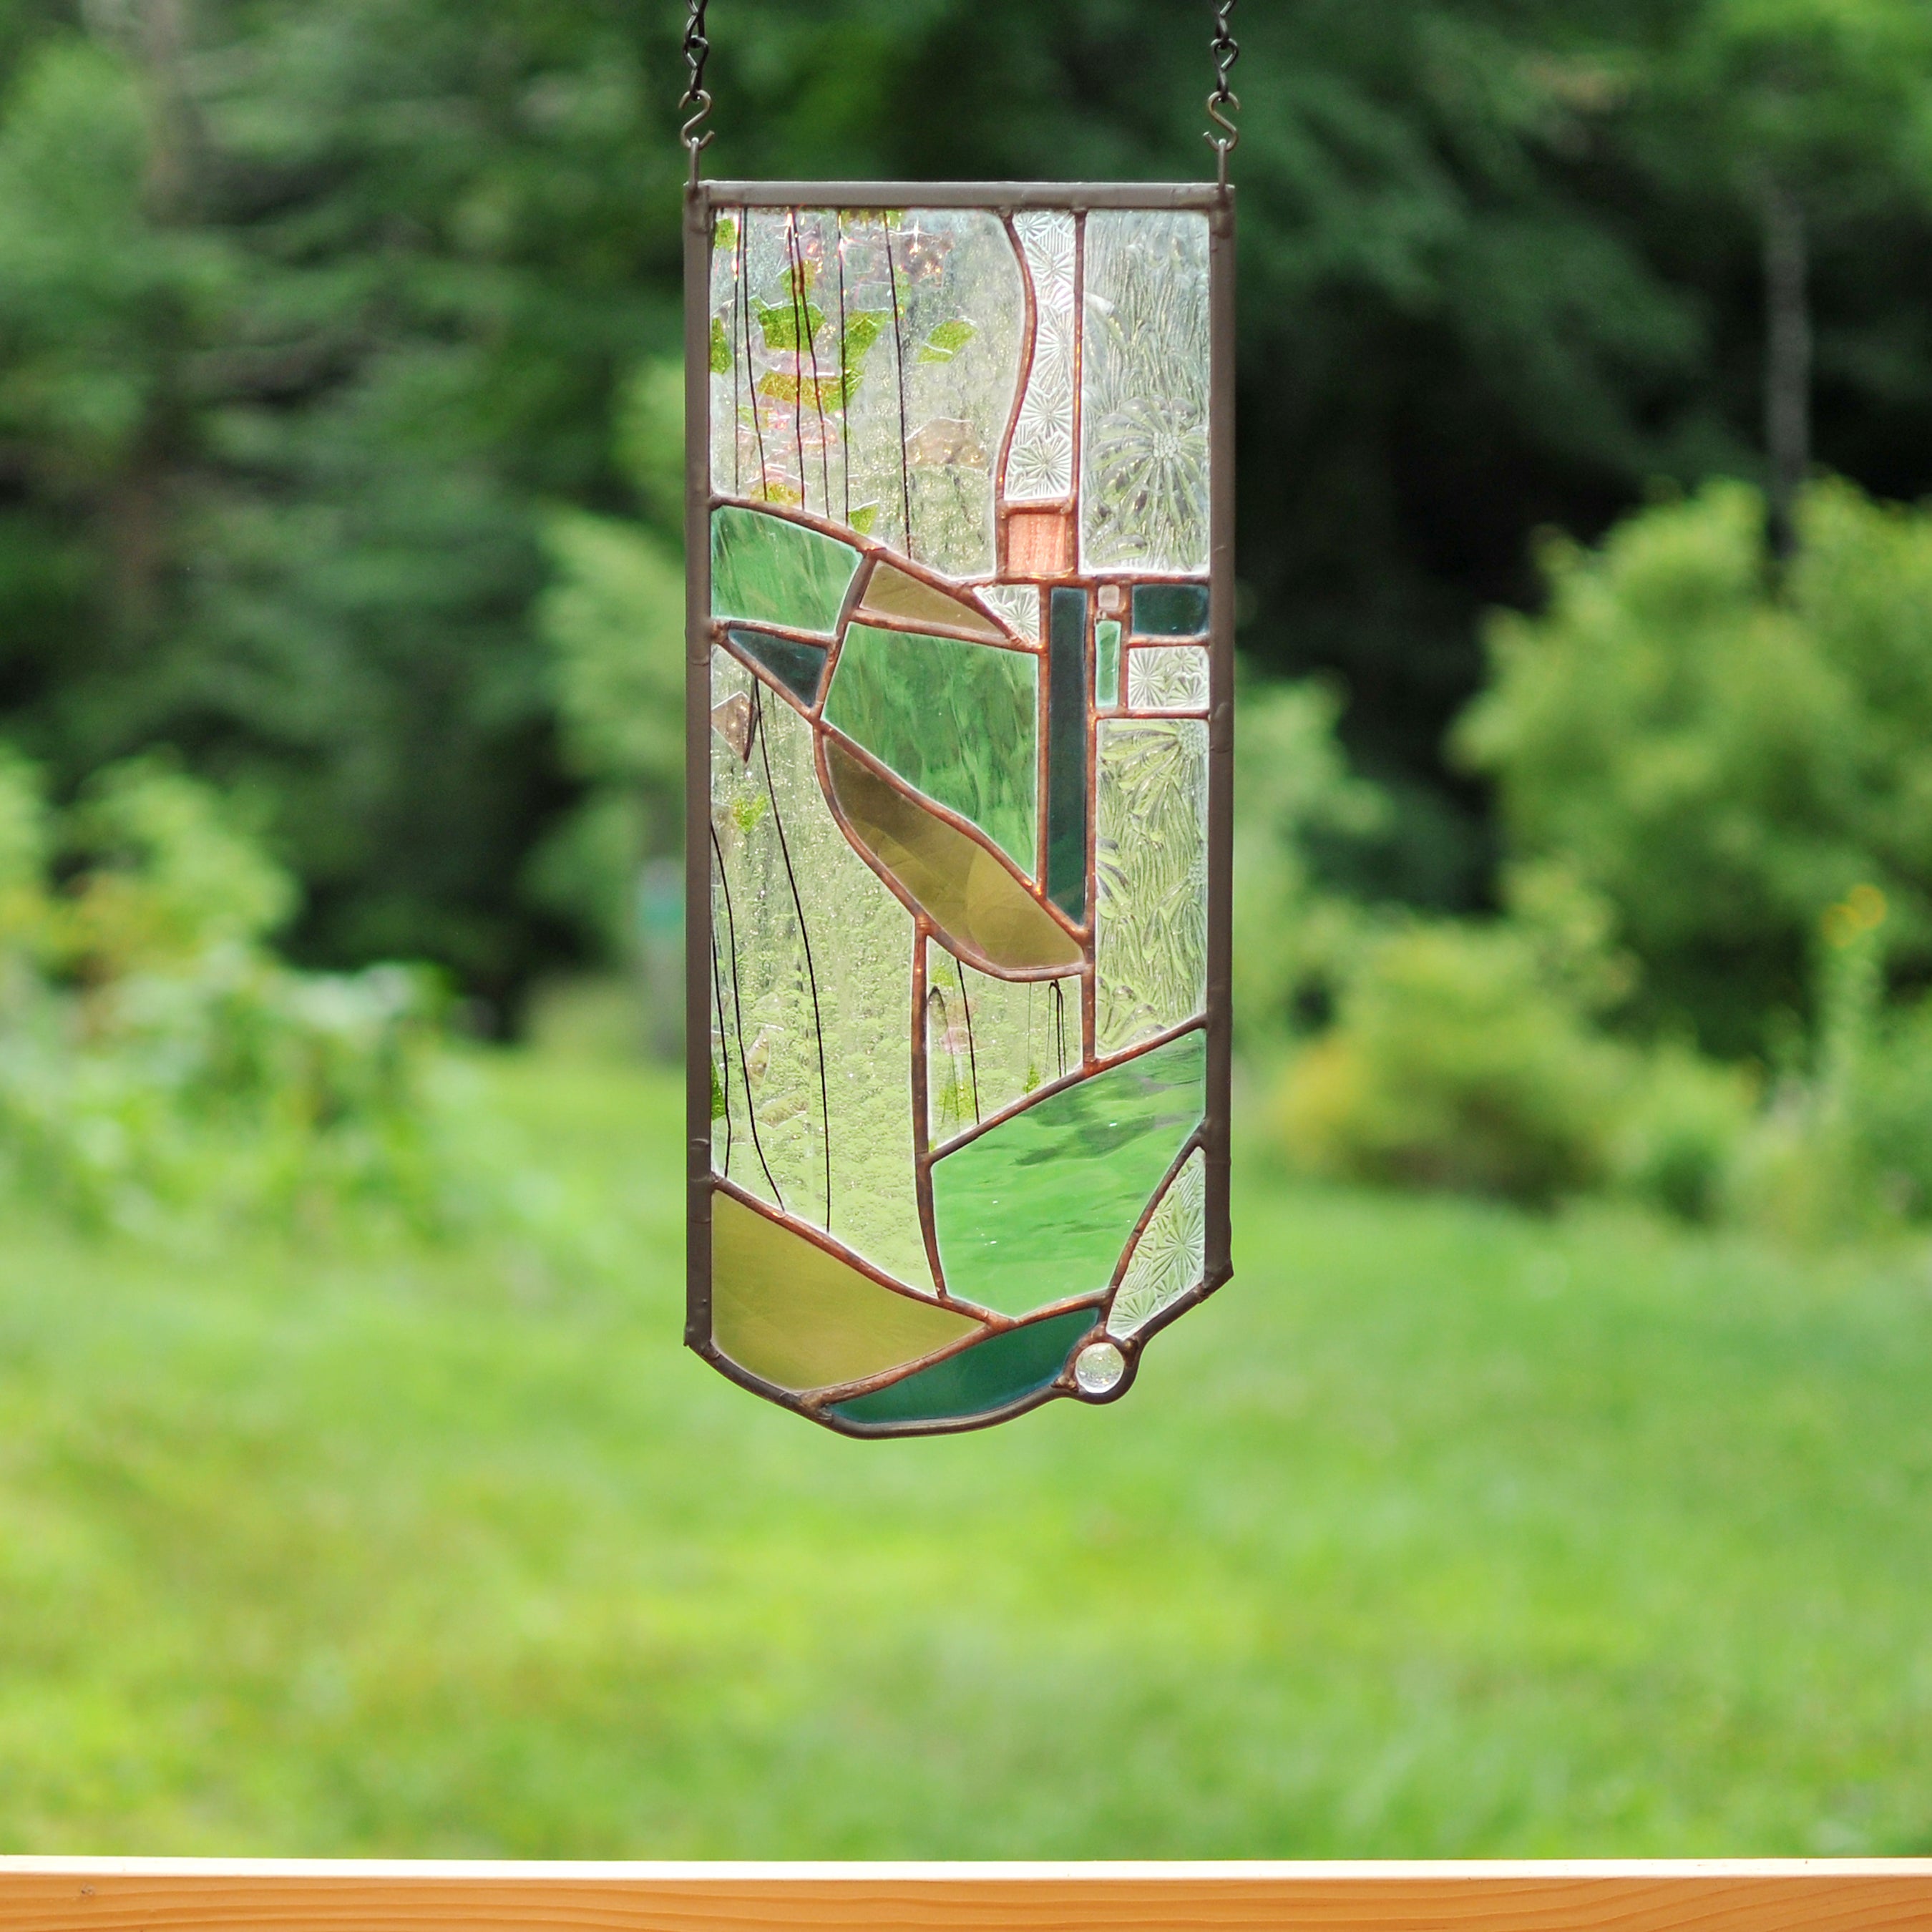 Small stained glass panel with organic lines made by Vermont artist Julia Brandis. Organic abstract.